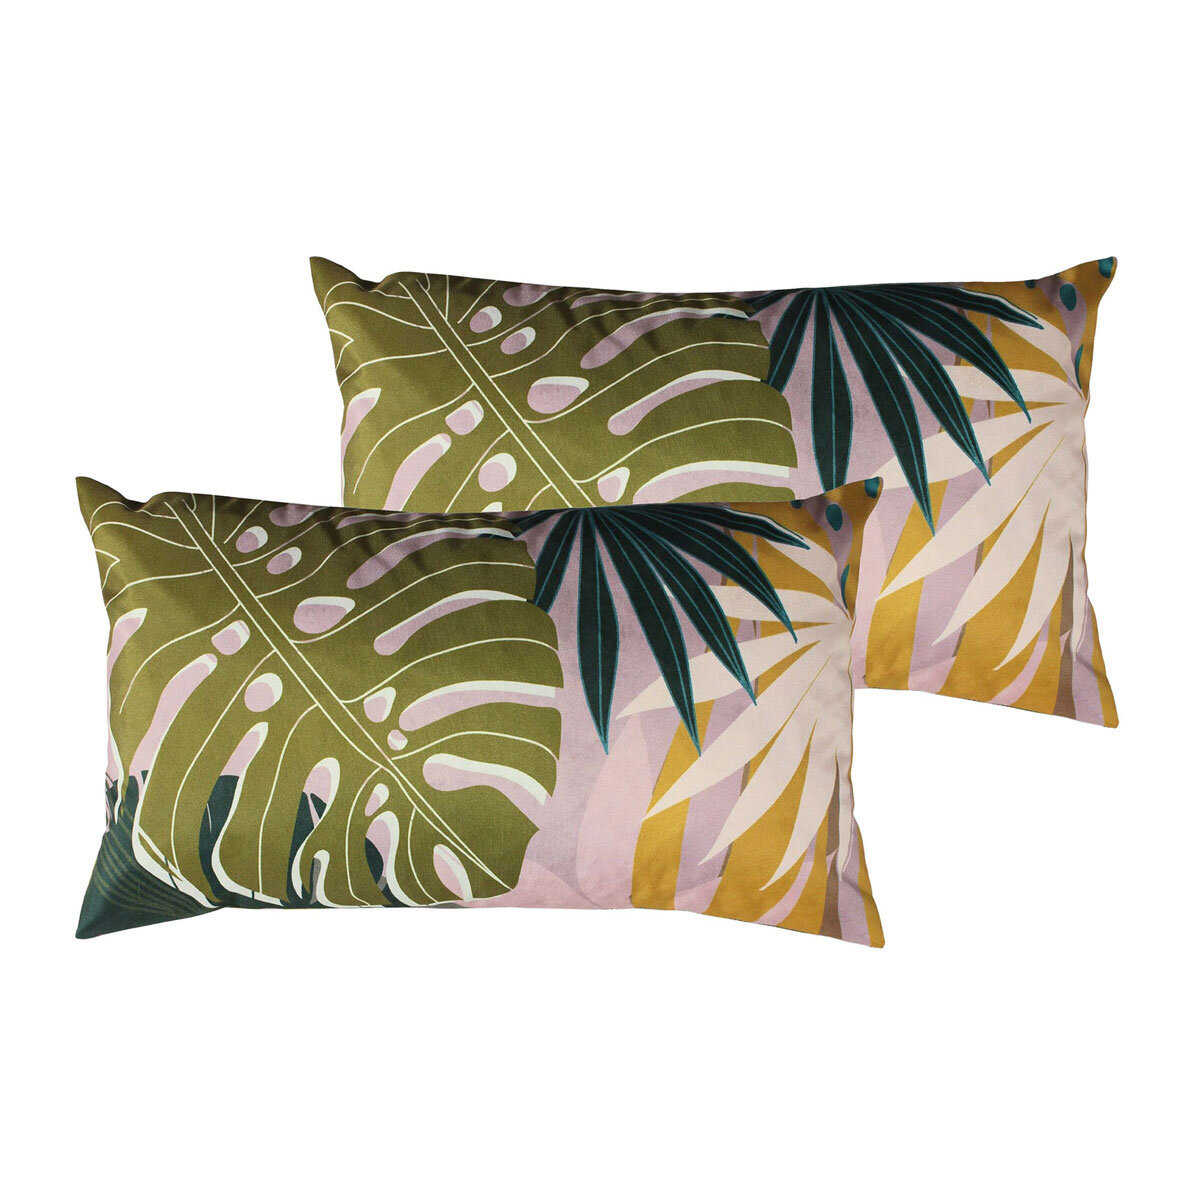 Riva Home Oblong Outdoor Cushion, 2 pack in 4 Designs